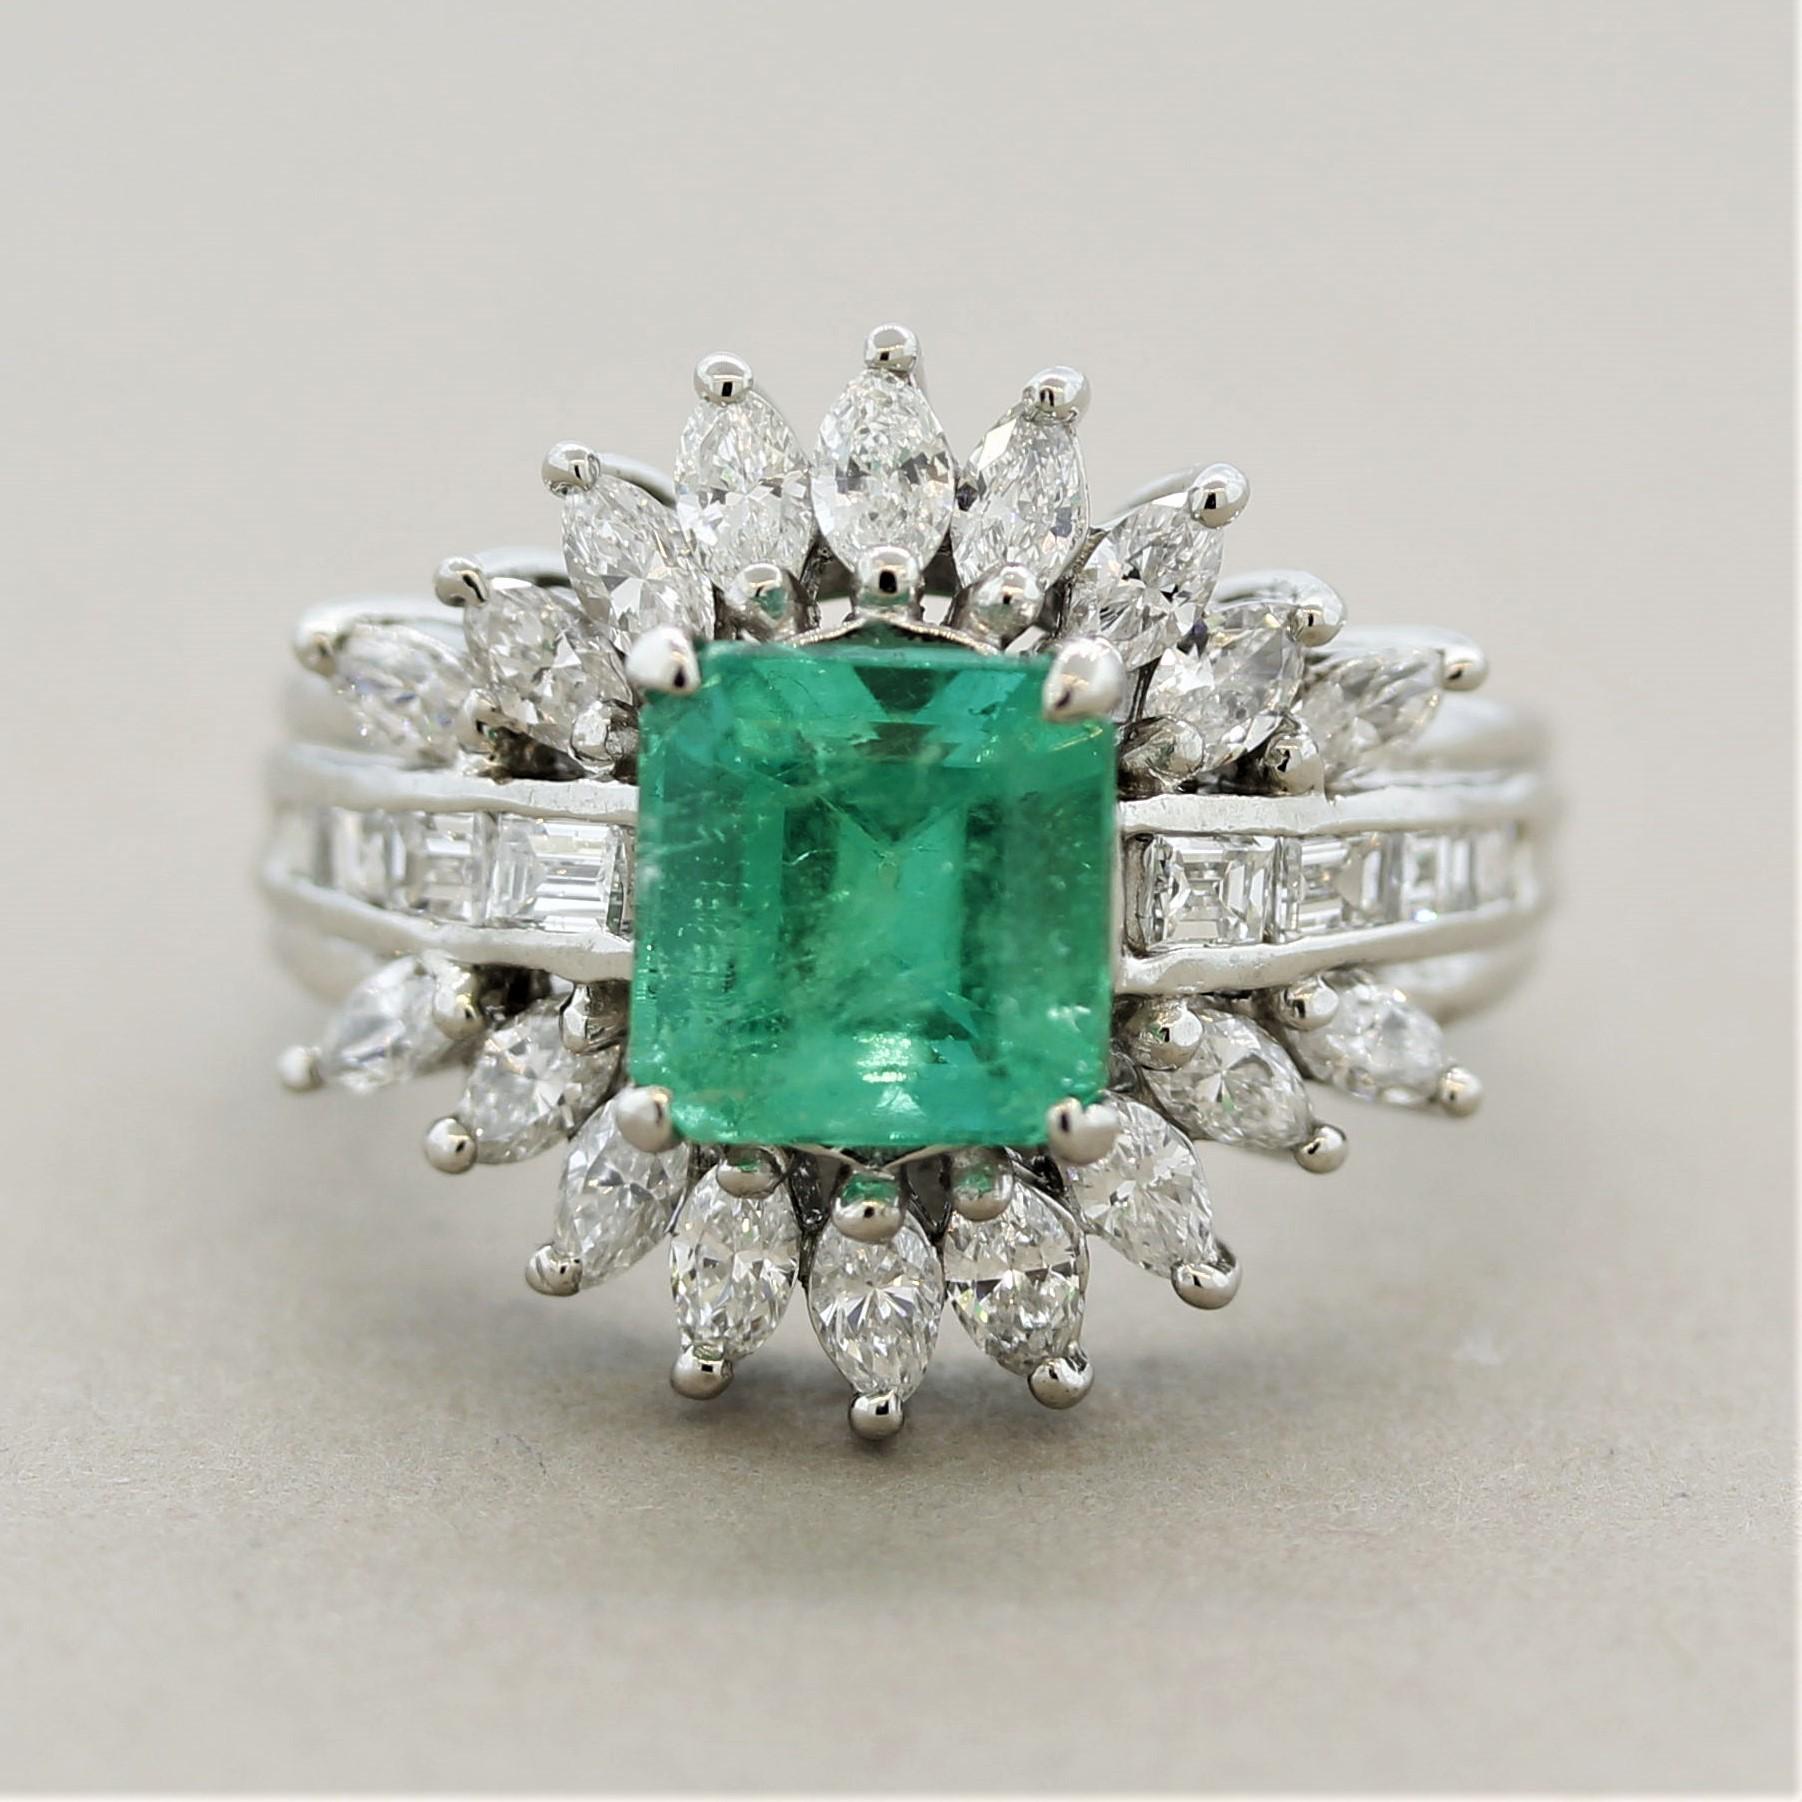 A bright and lively platinum ring featuring a fine 2.02 carat emerald. It has a bright vivid green color and is free of any large noticeable inclusions. Accenting the piece are 1.35 carats of baguette-cut and marquise-shaped diamonds set around the